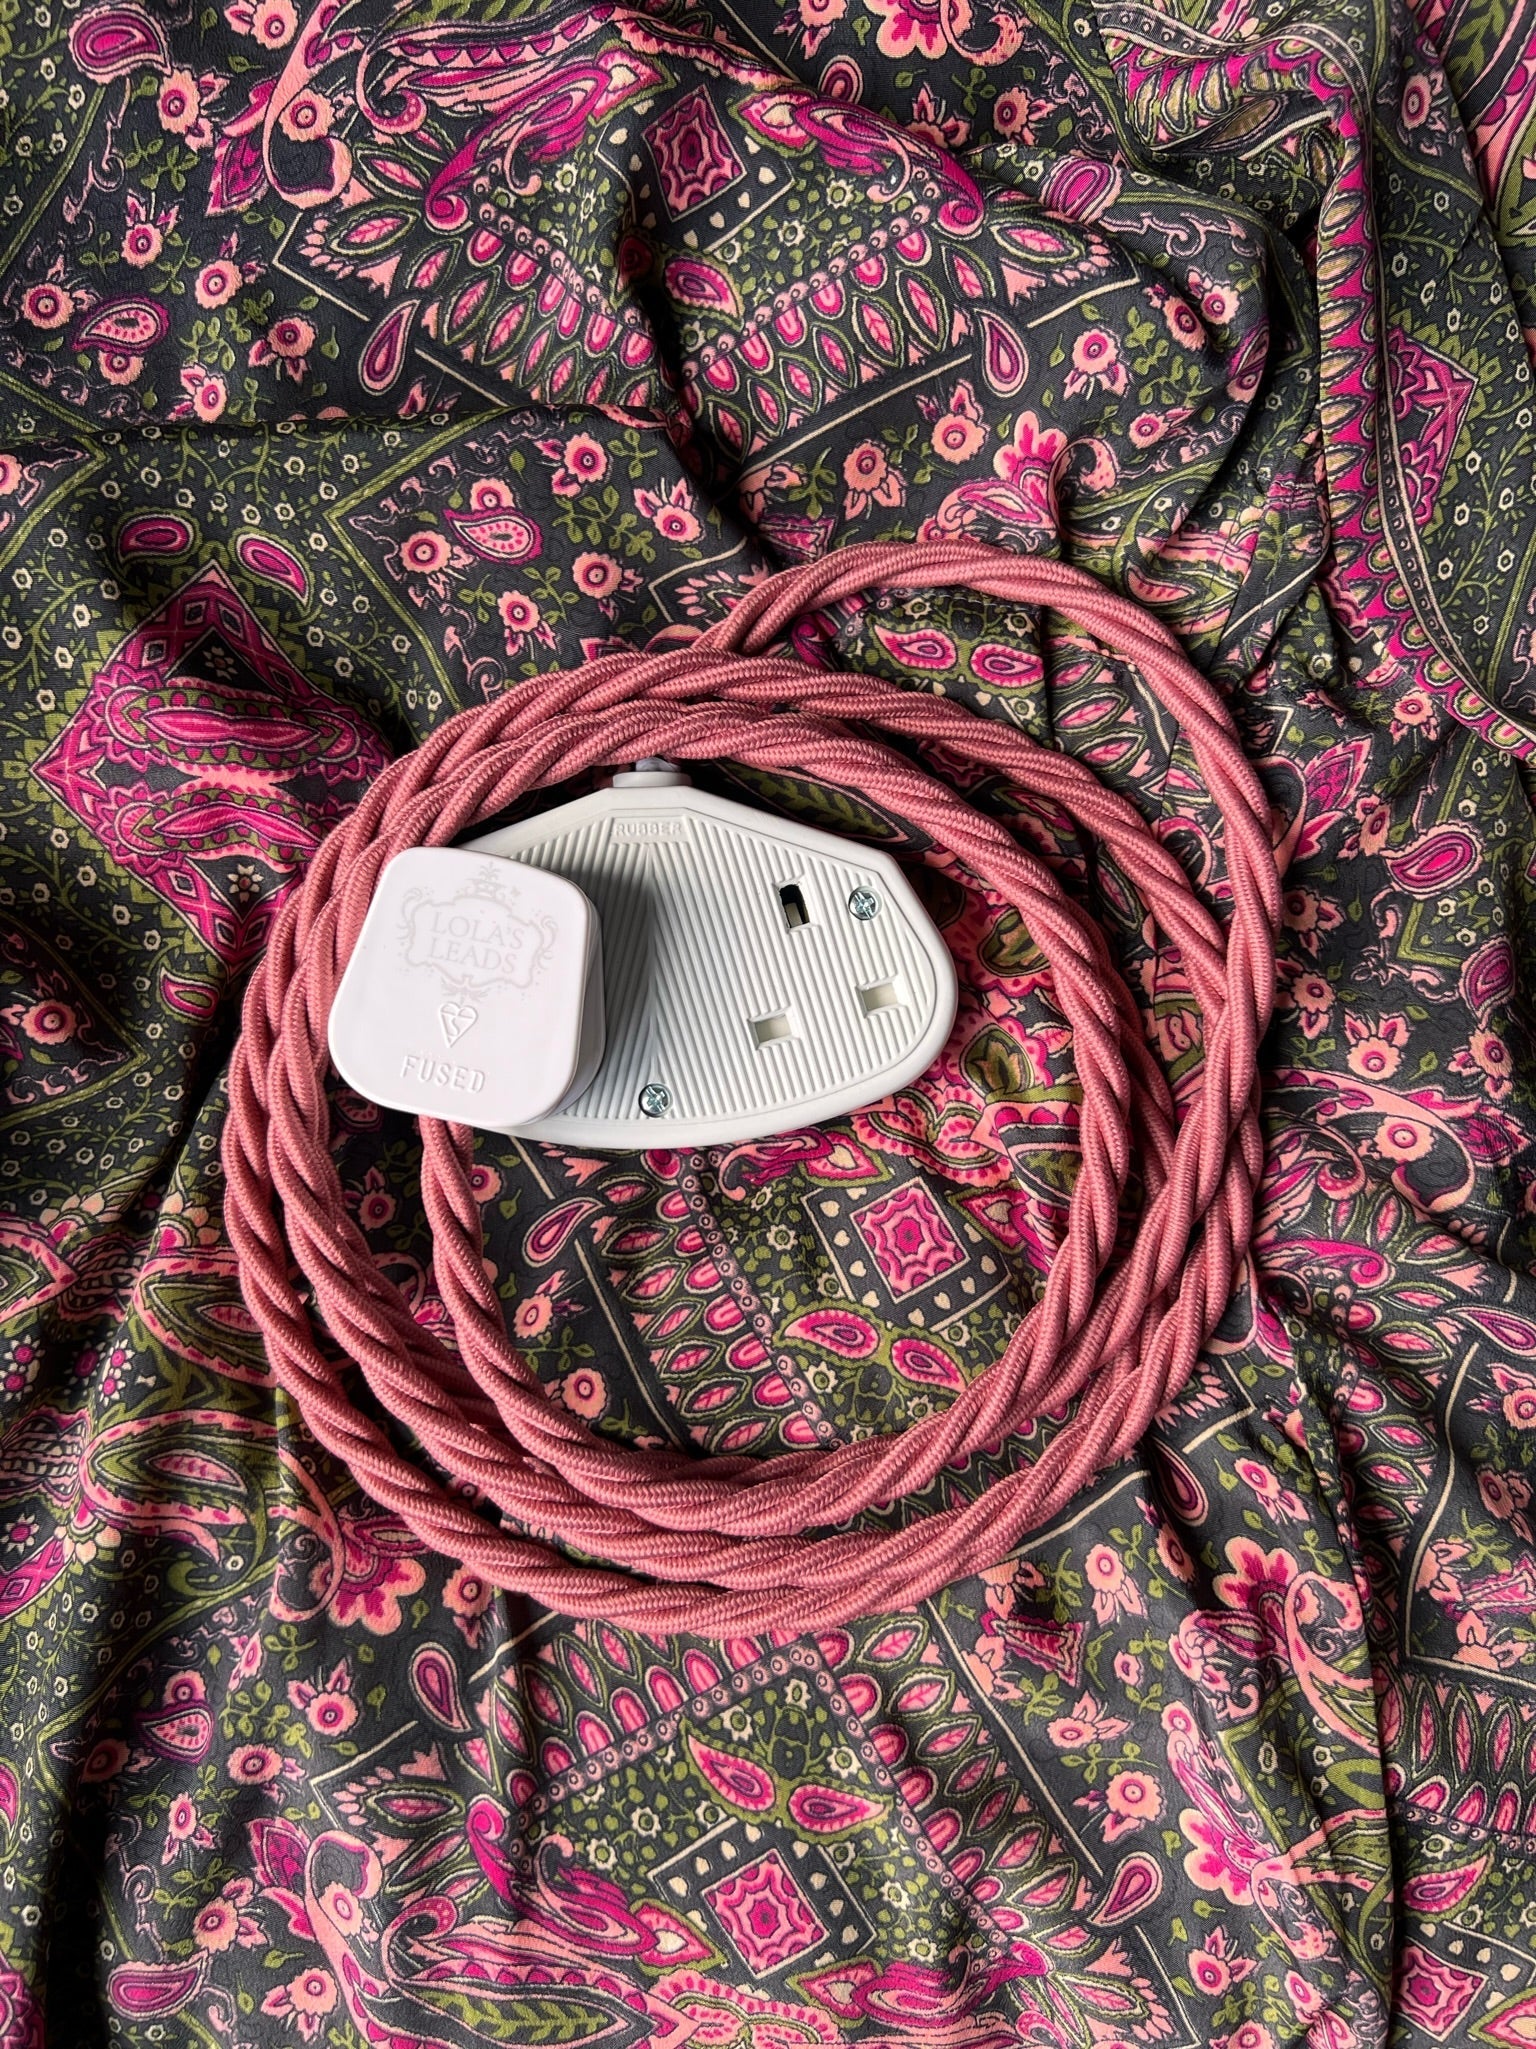 Lola's Leads Pompadour Pink Fabric Covered Extension Cable